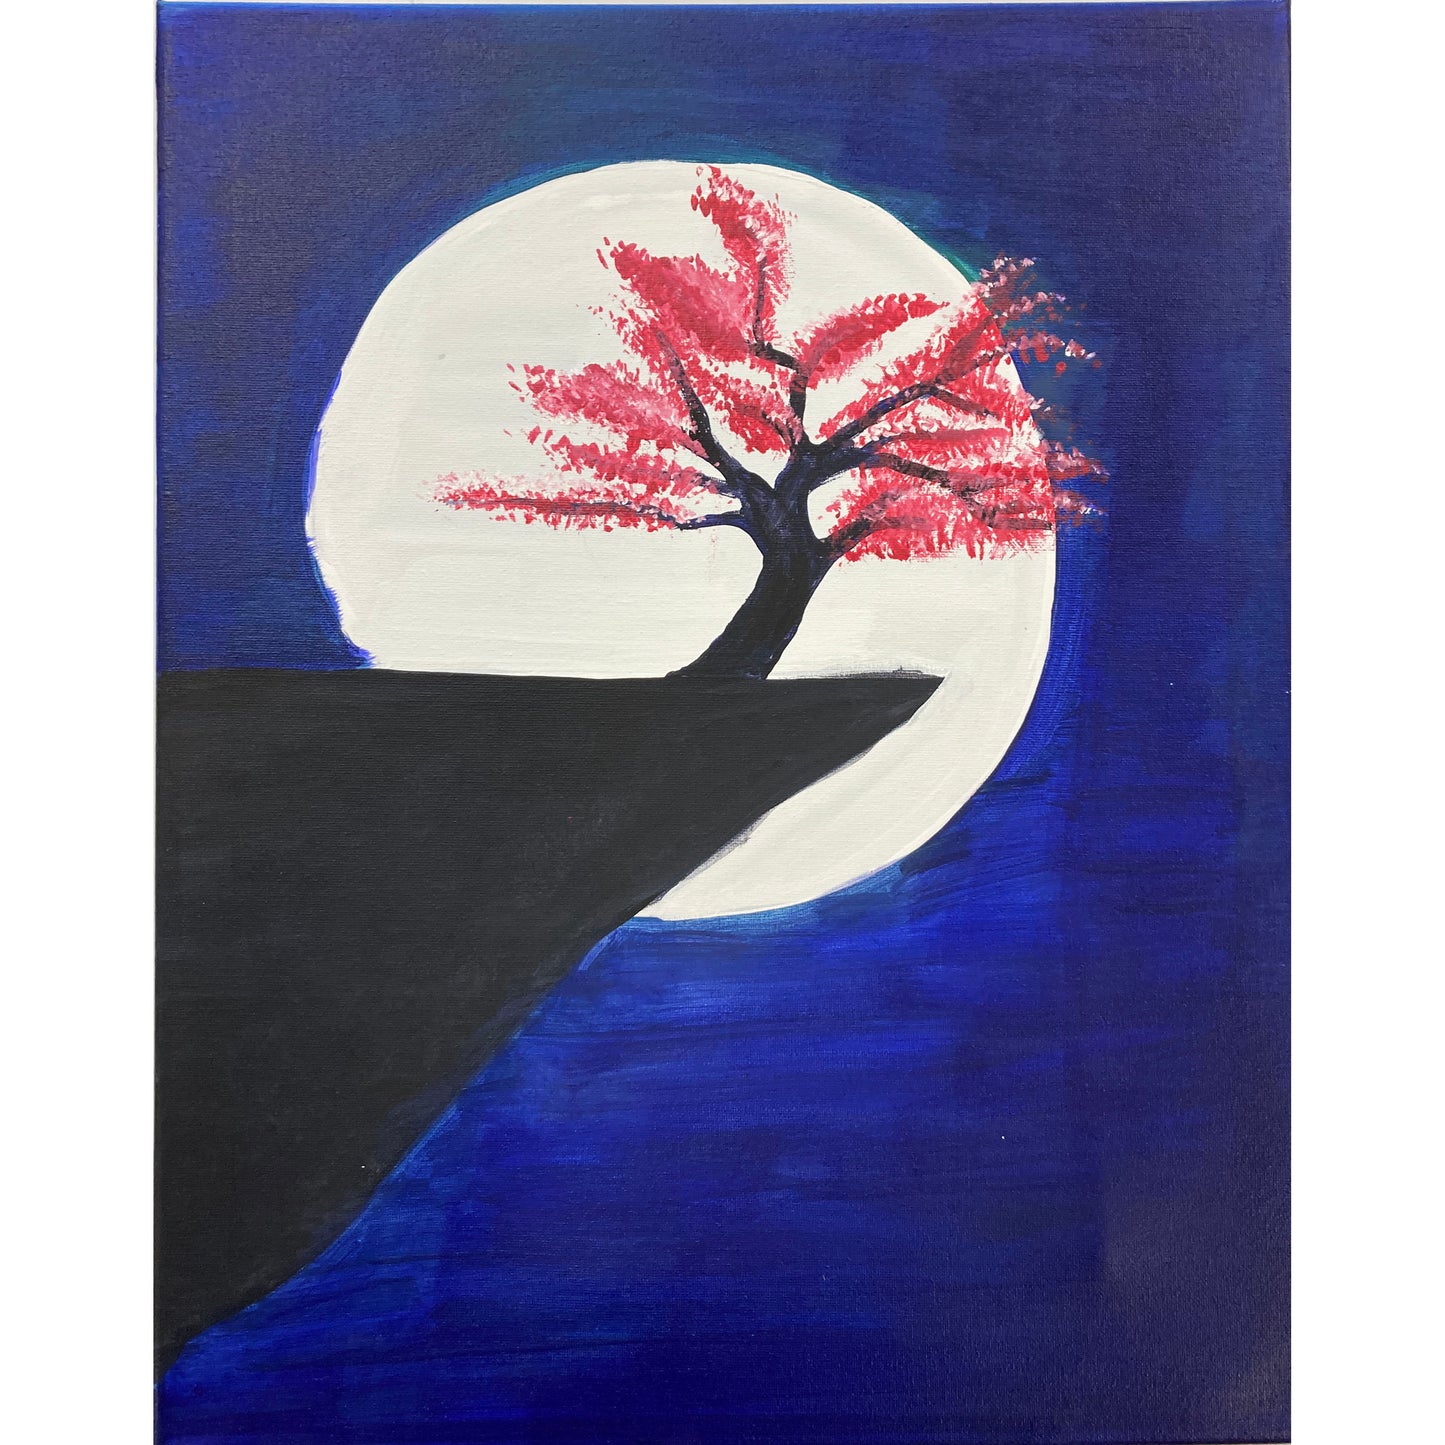 Acrylic Paint on Stretched Canvas, 20 x 16 Original Fine Art, Moonlight Cherry Blossom made by Alec Lopez